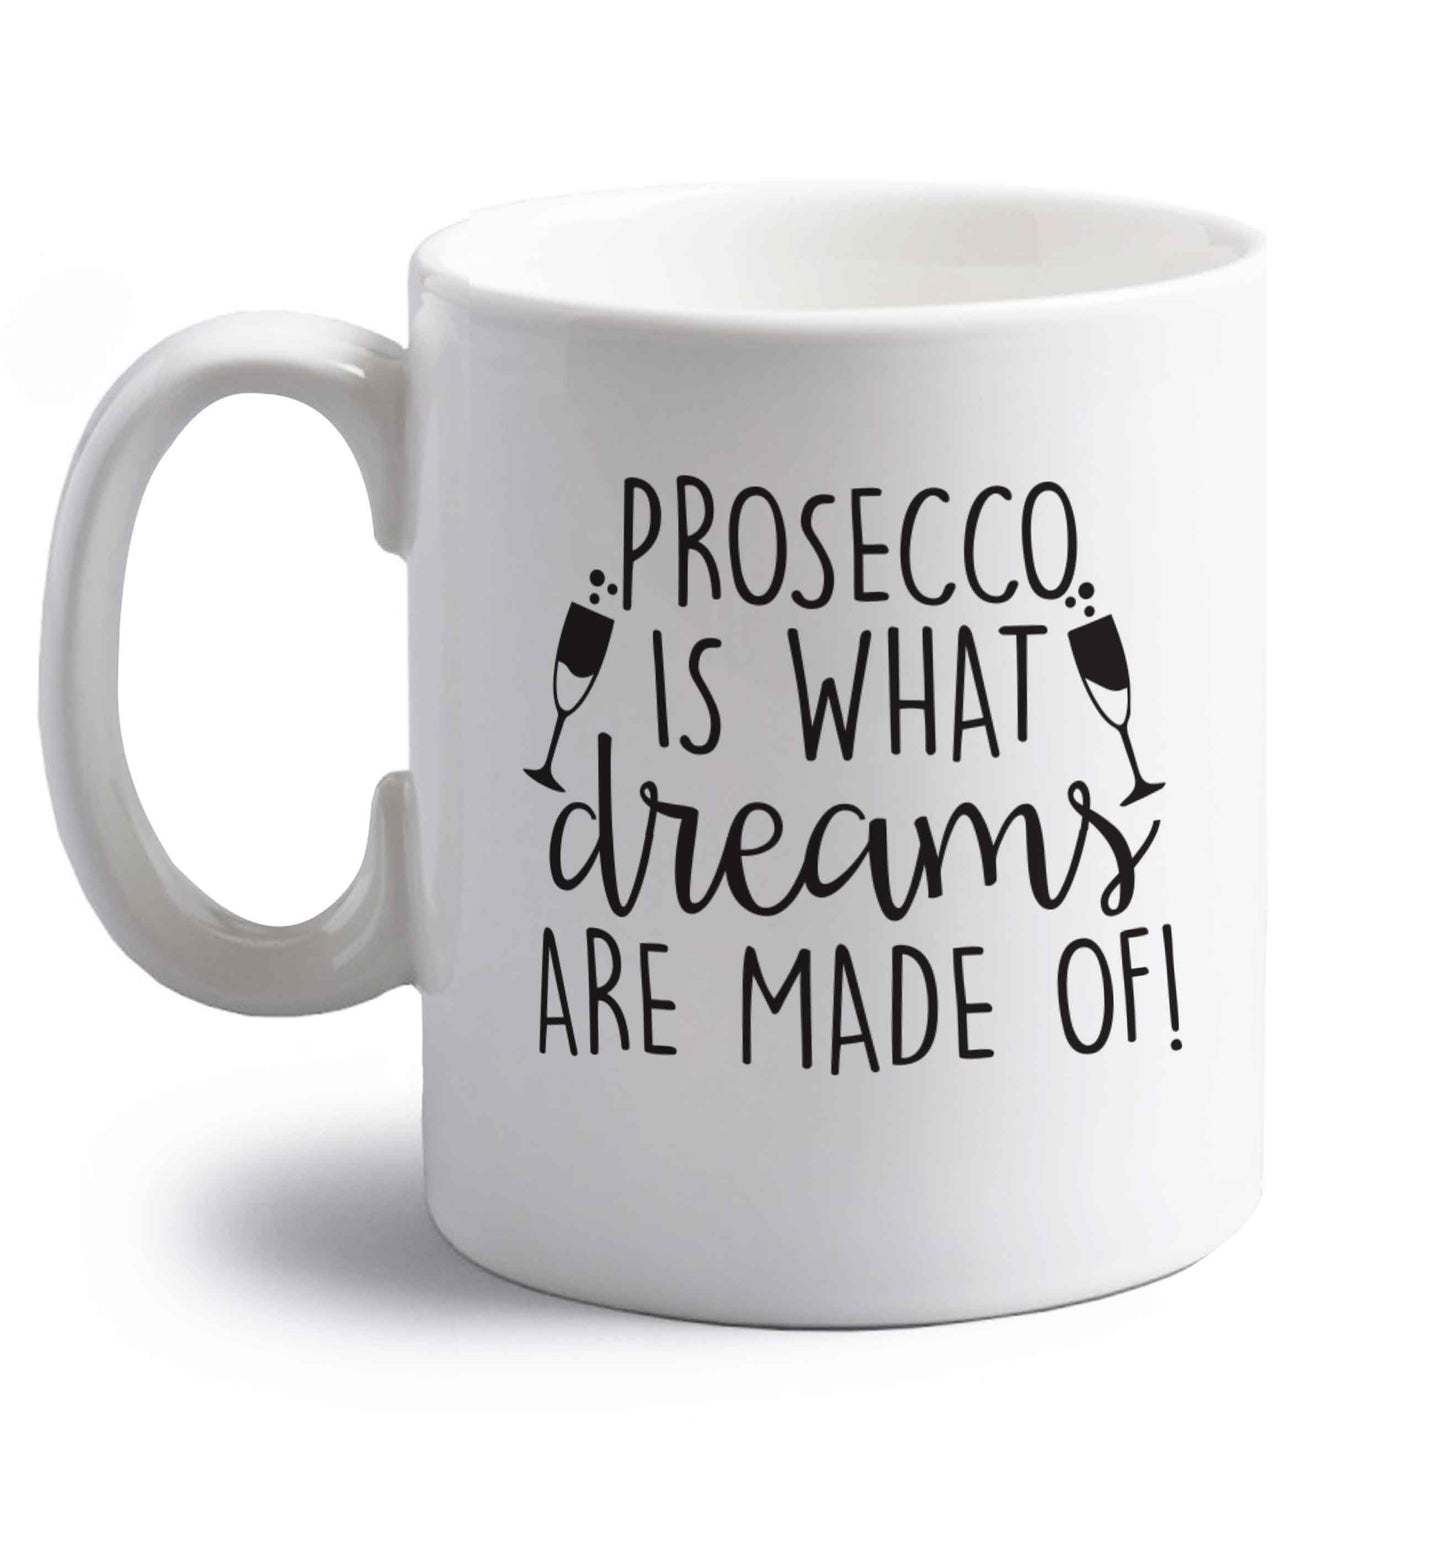 Prosecco is what dreams are made of right handed white ceramic mug 